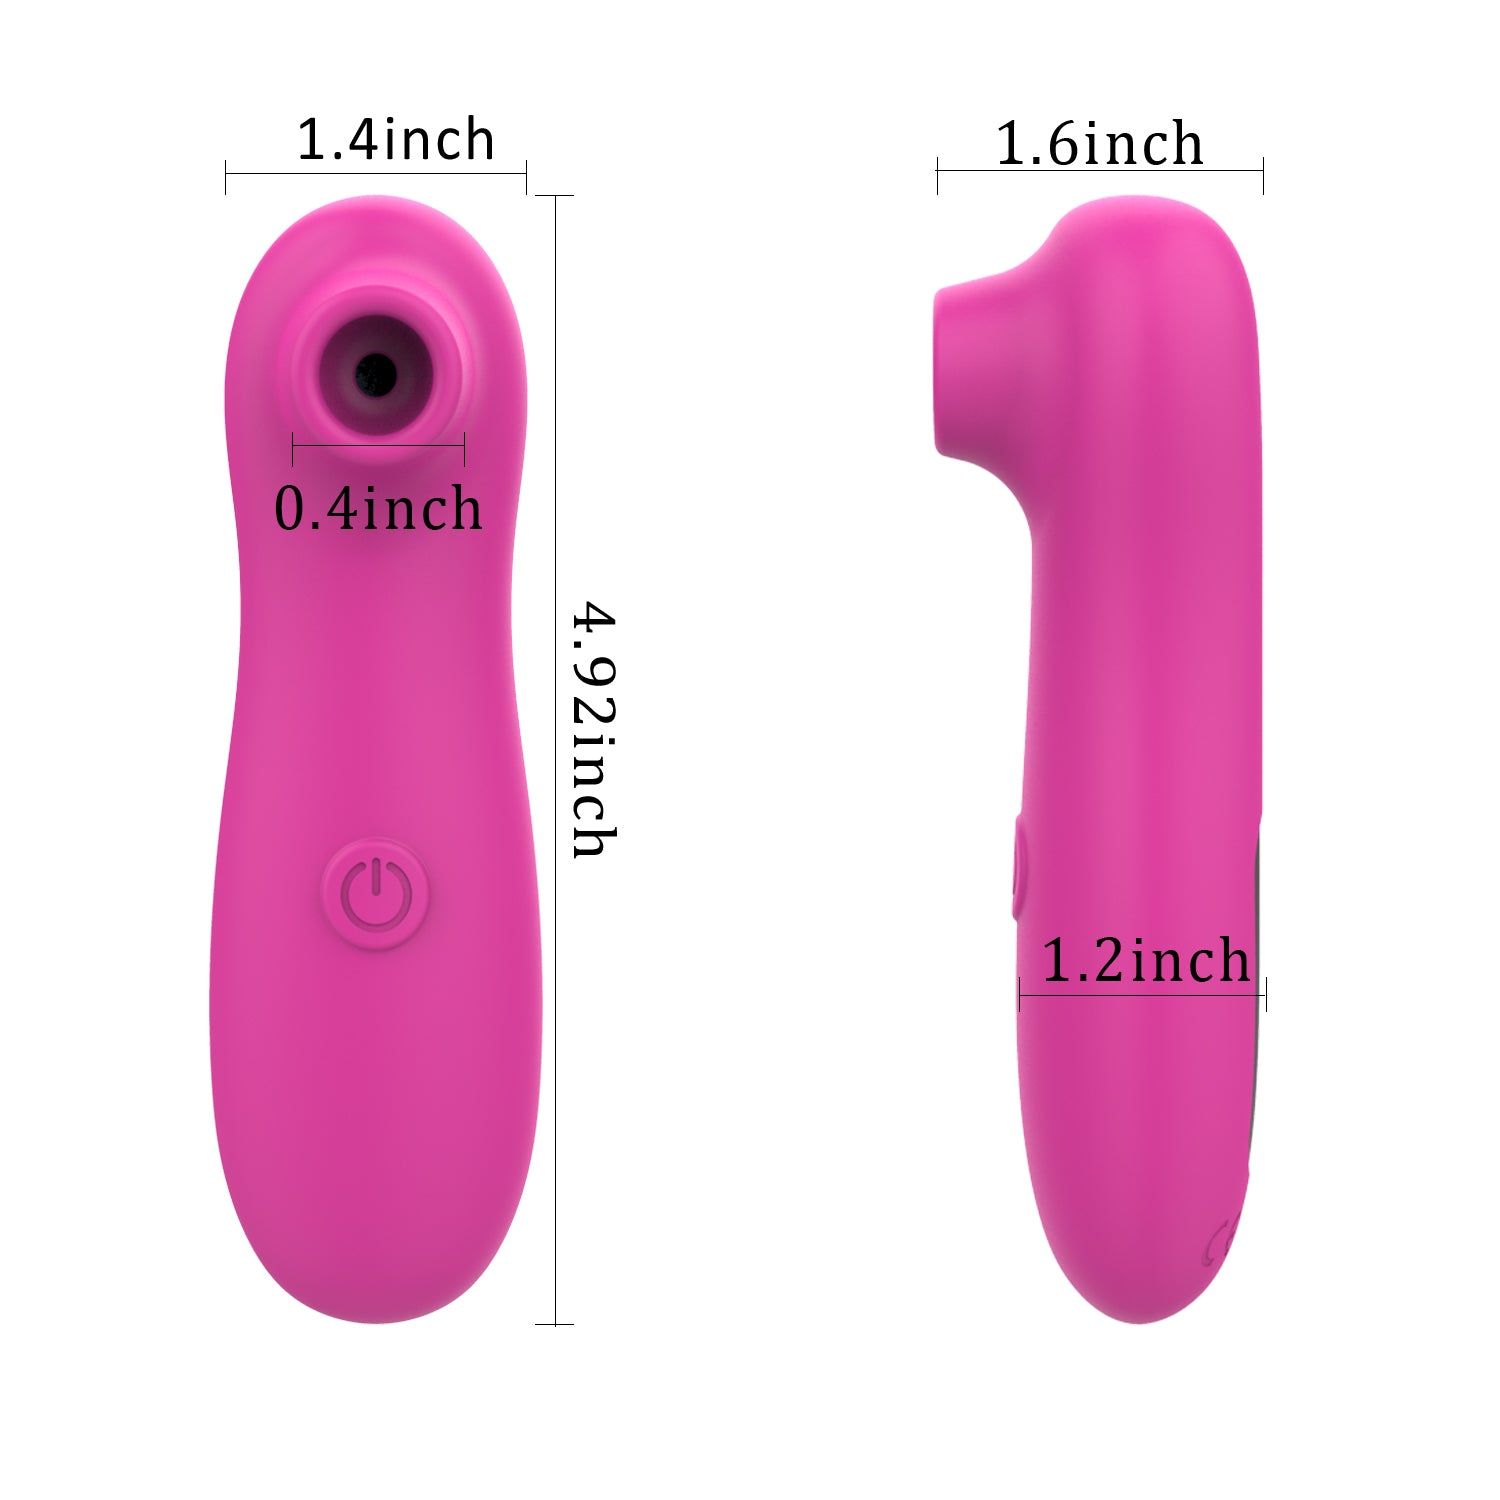 Sucking & Flapping 2 in 1 Clitoral Vibrator for Vagina Stimulation - Clit Sucker Vibrators Stimulator for Oral Sex Solo Blowjob, Nipples Massagers Adult Sex Toys for Women or Couples